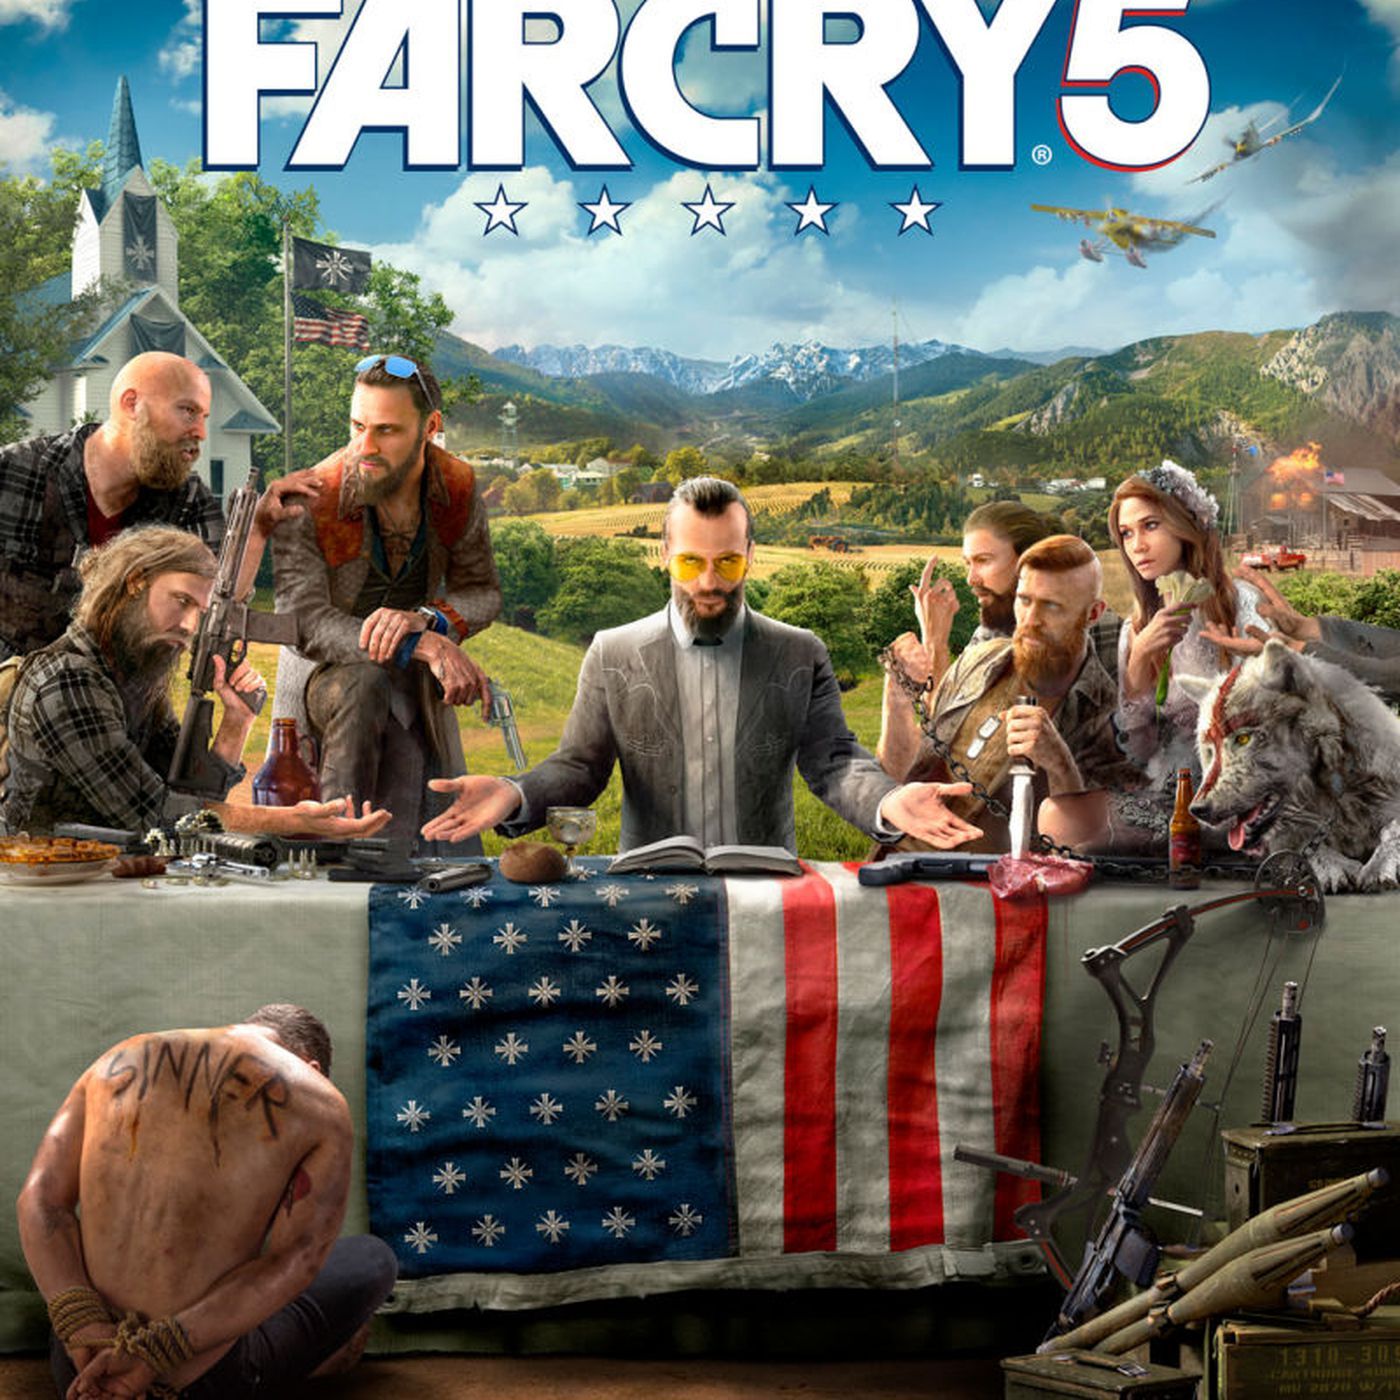 Far Cry 5 promises to be controversial, but not for the usual